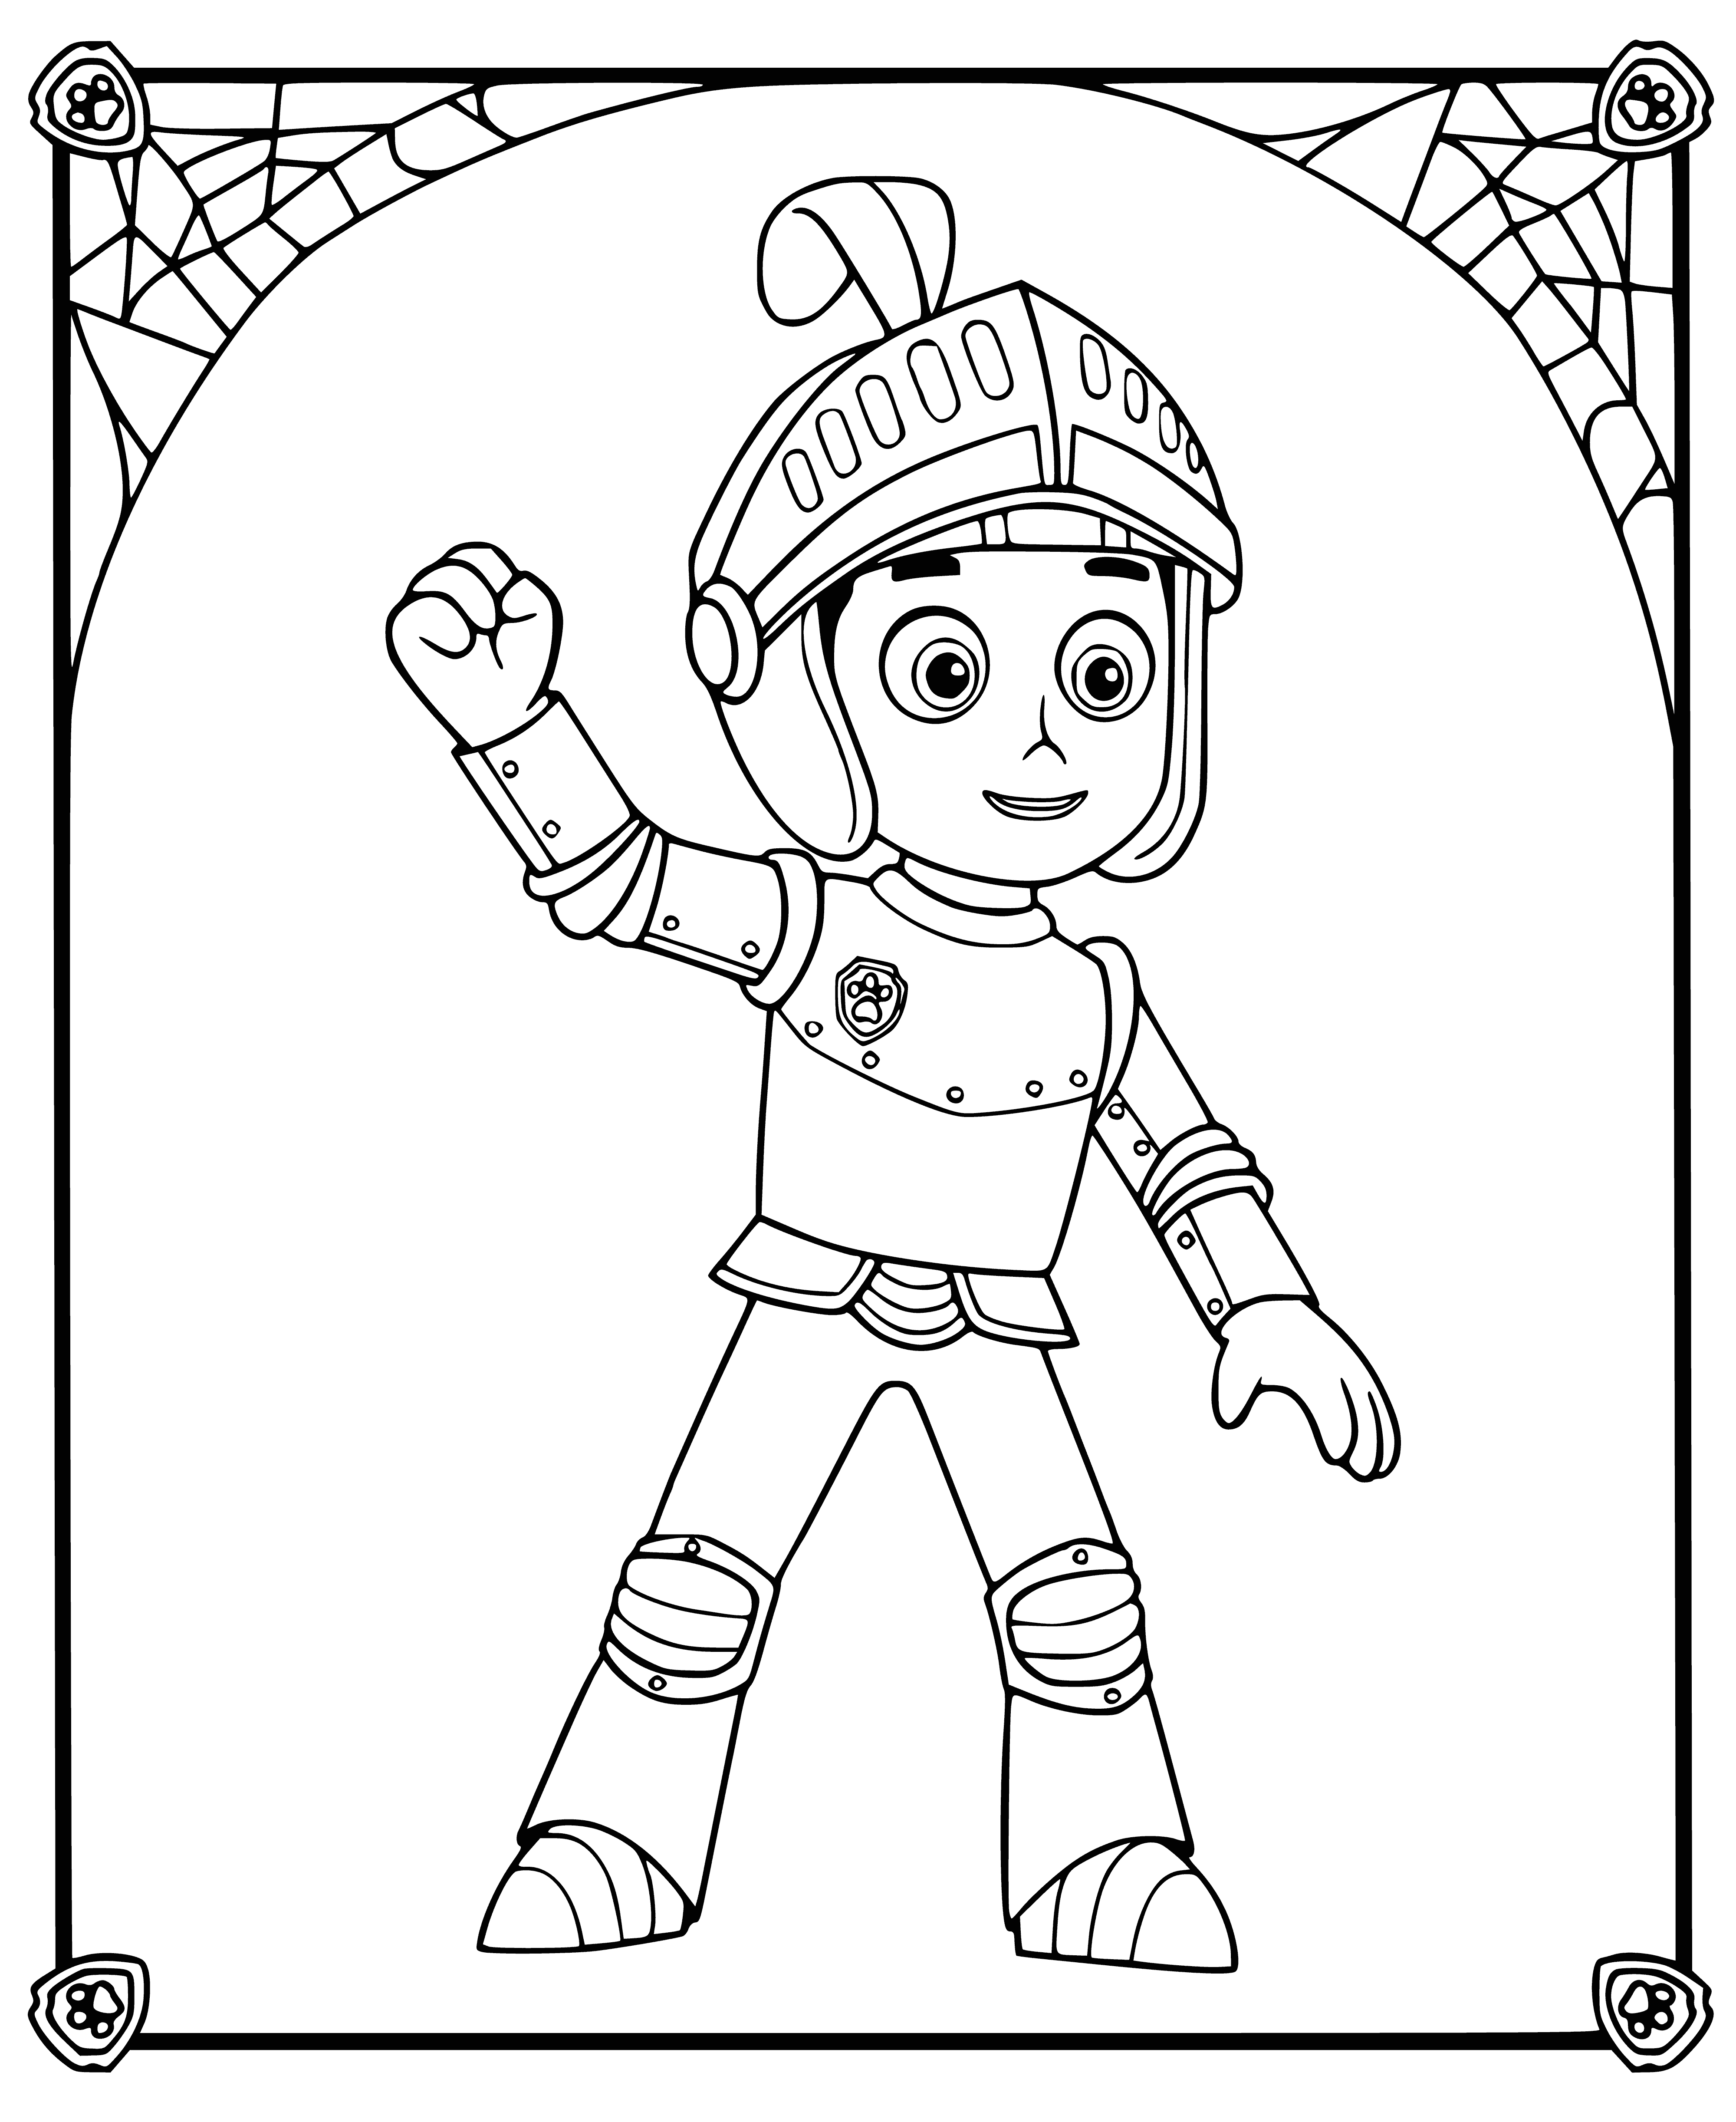 Rider knight coloring page